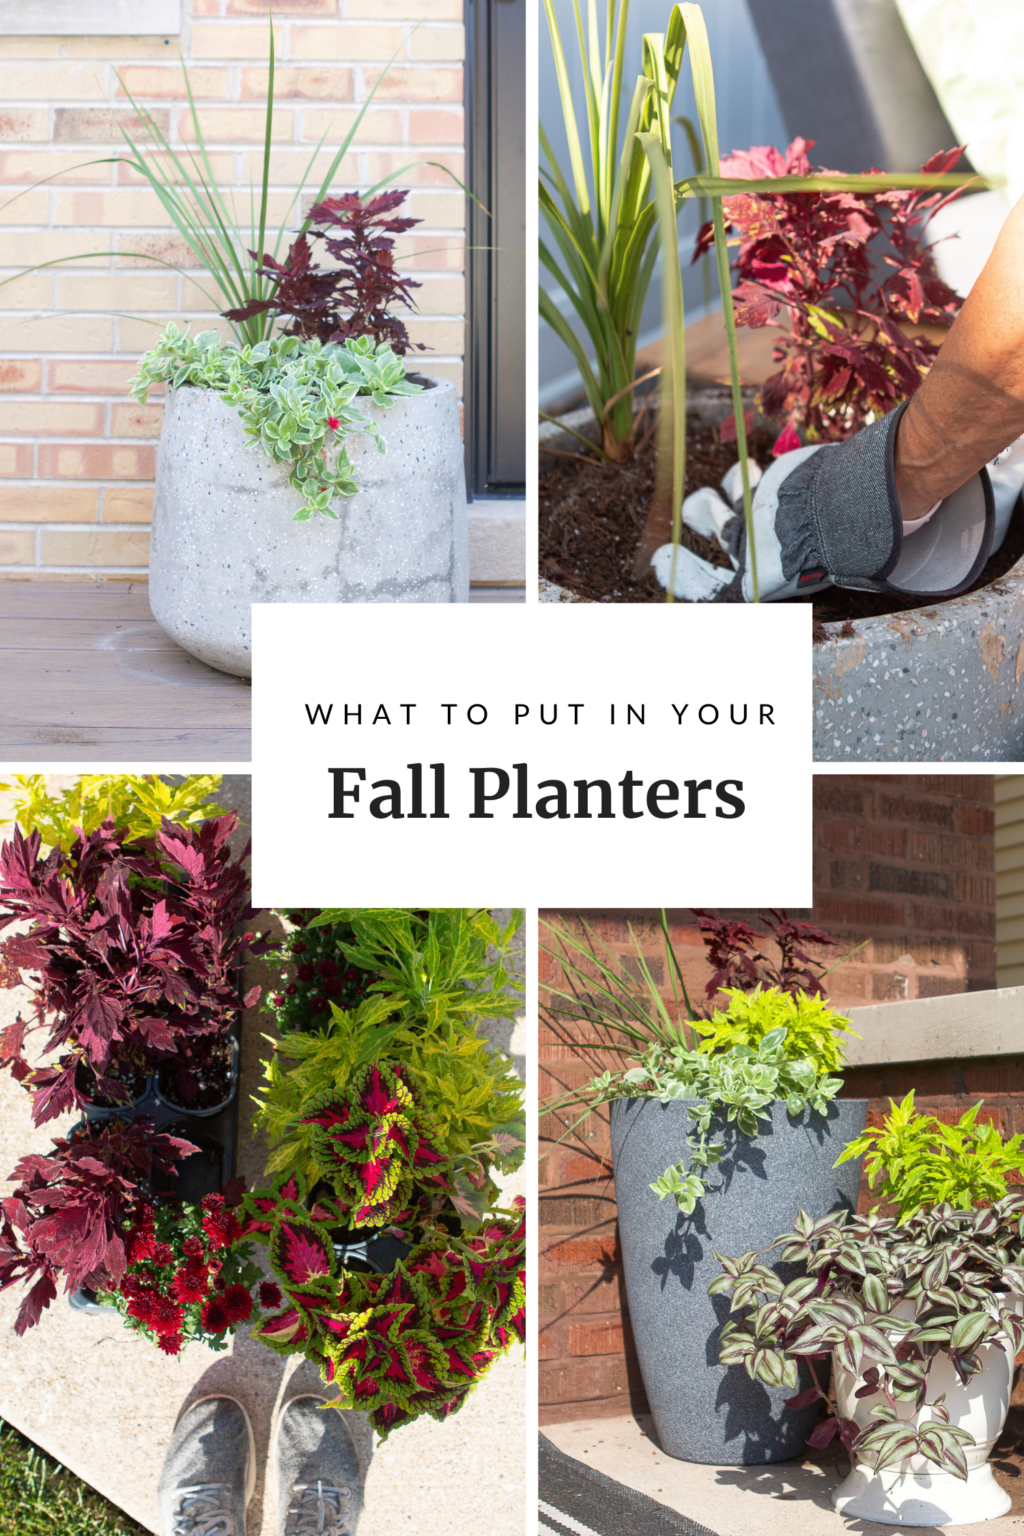 What to put in your fall planters